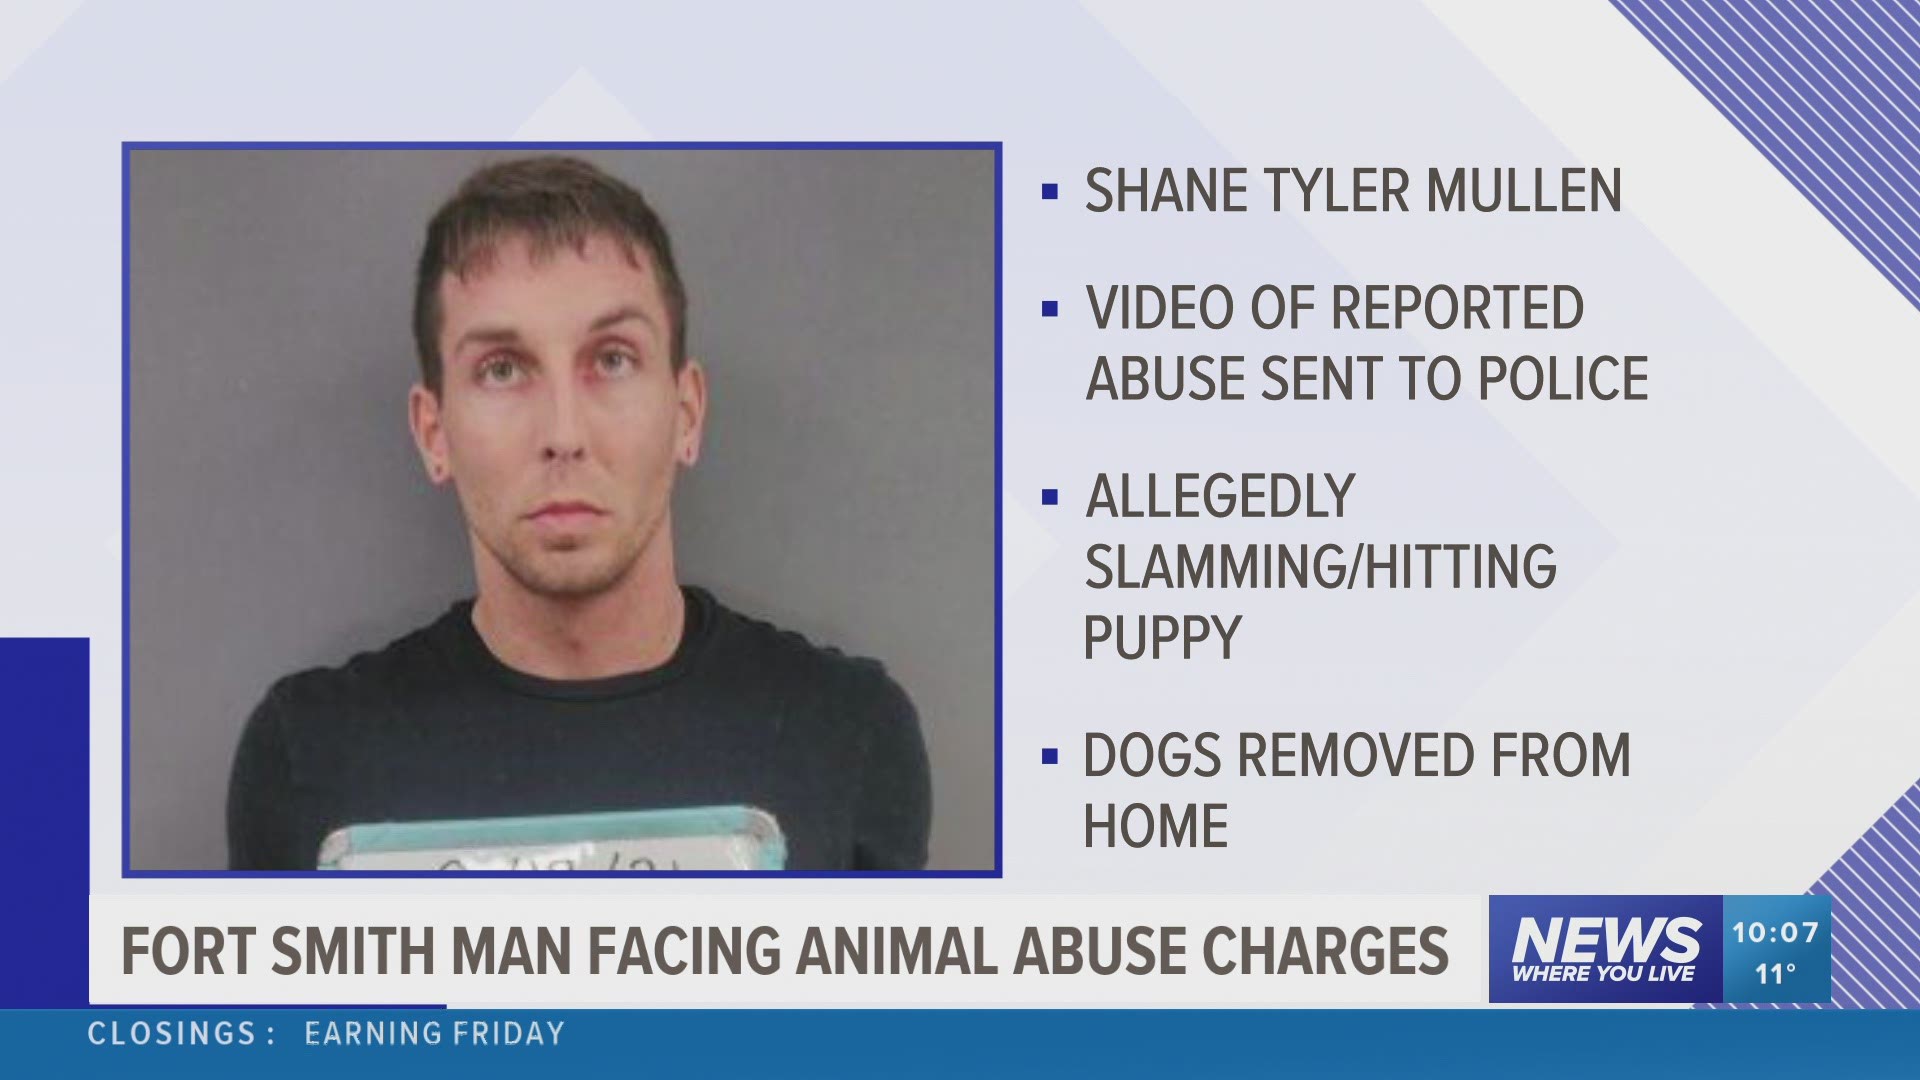 A 28-year-old man from Fort Smith was arrested for allegedly abusing a 6-month-old puppy. https://bit.ly/3kenu3n